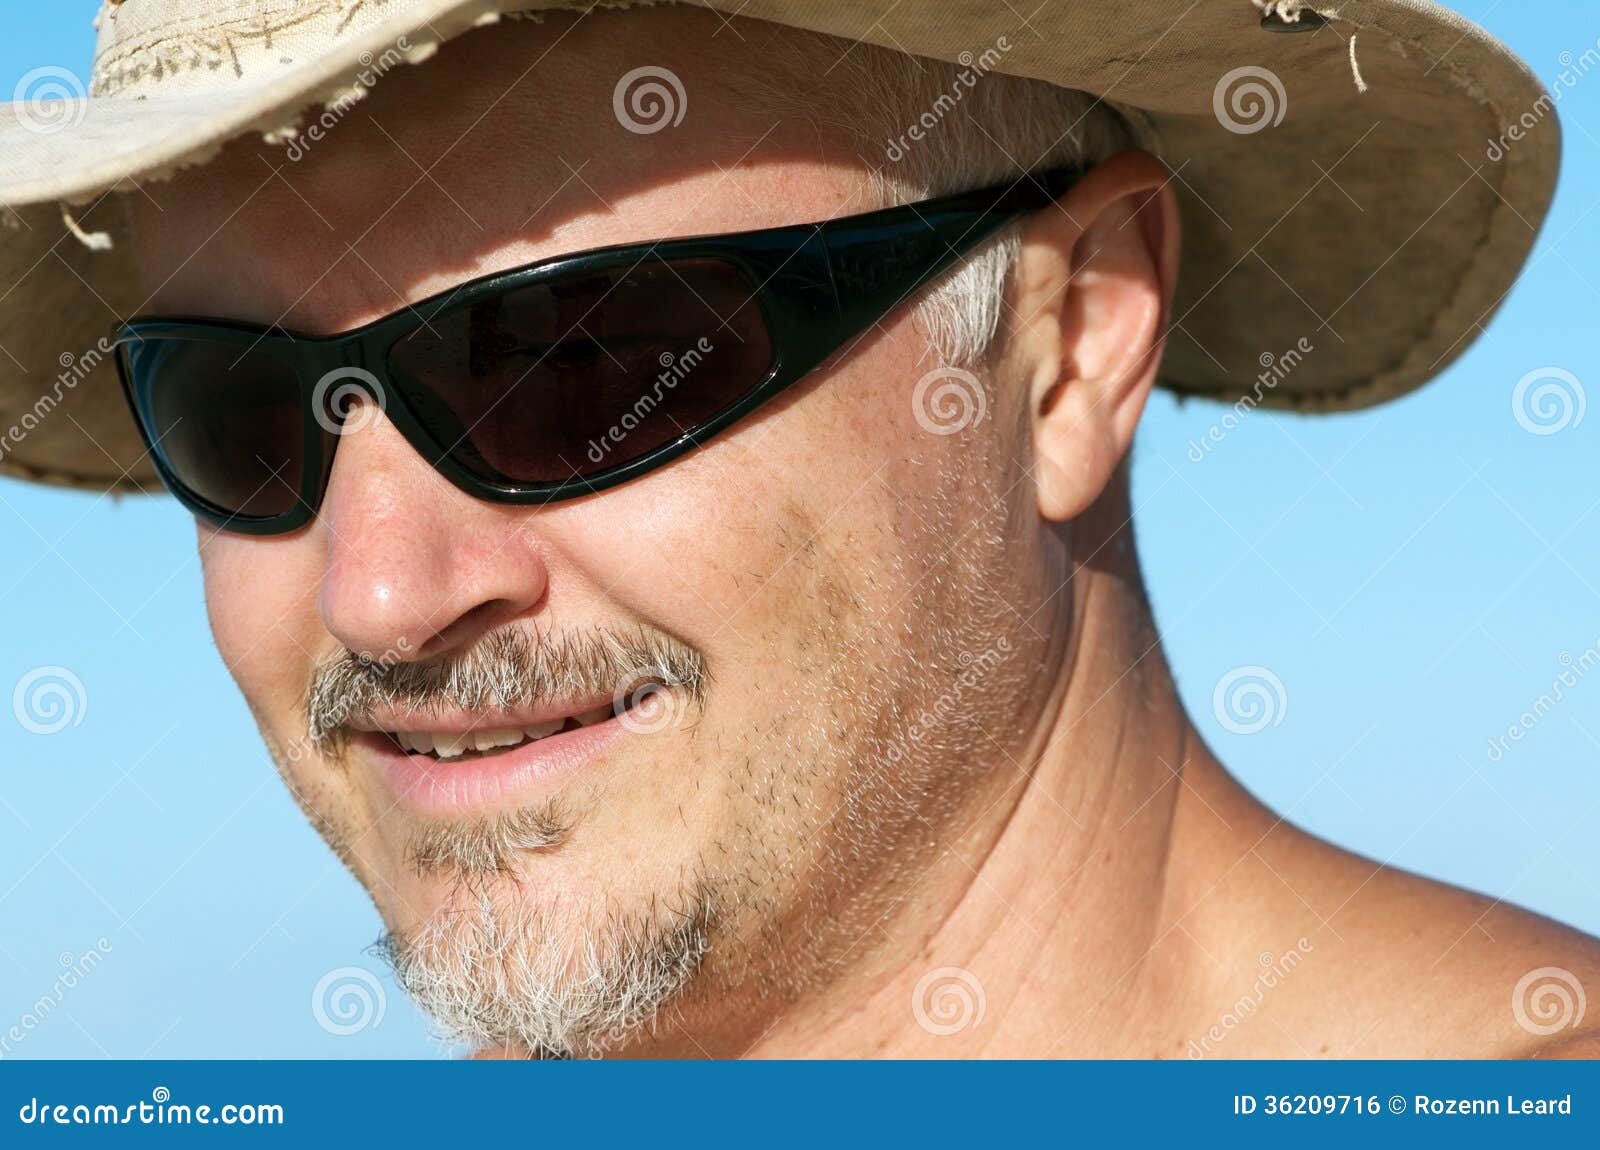 man with sunglasses and hat